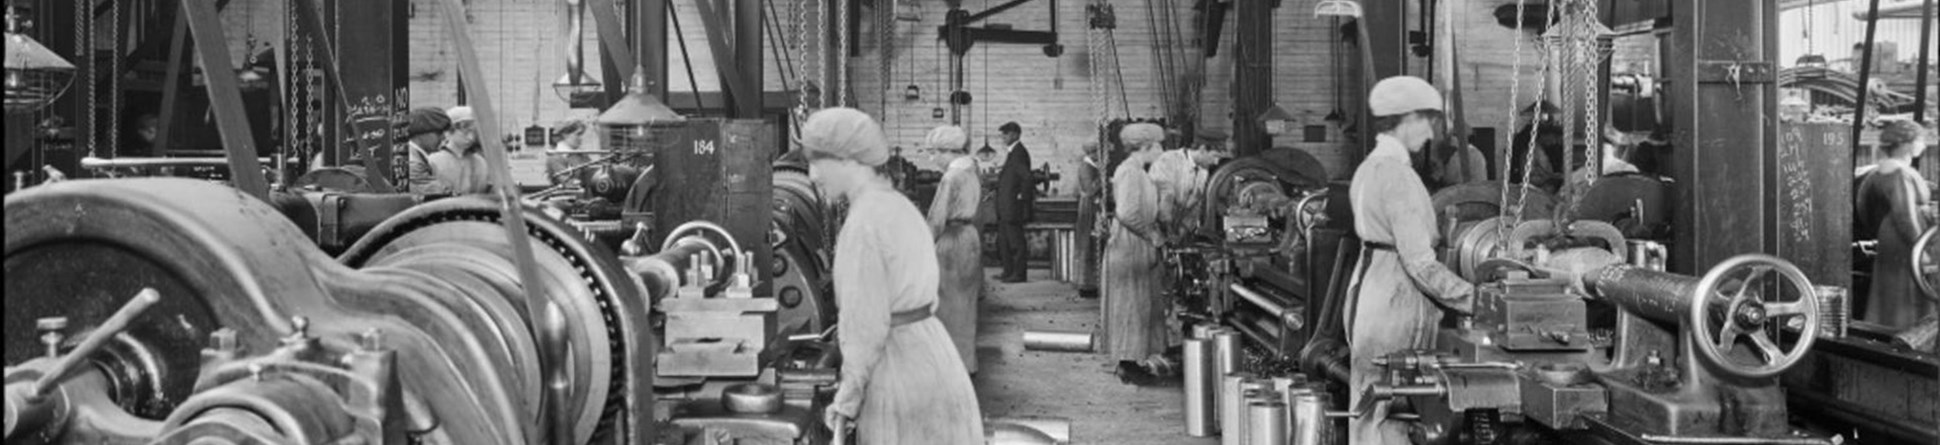 Cunards Shellworks, Liverpool, women workers operate large lathes to carefully finish steel artillery shells